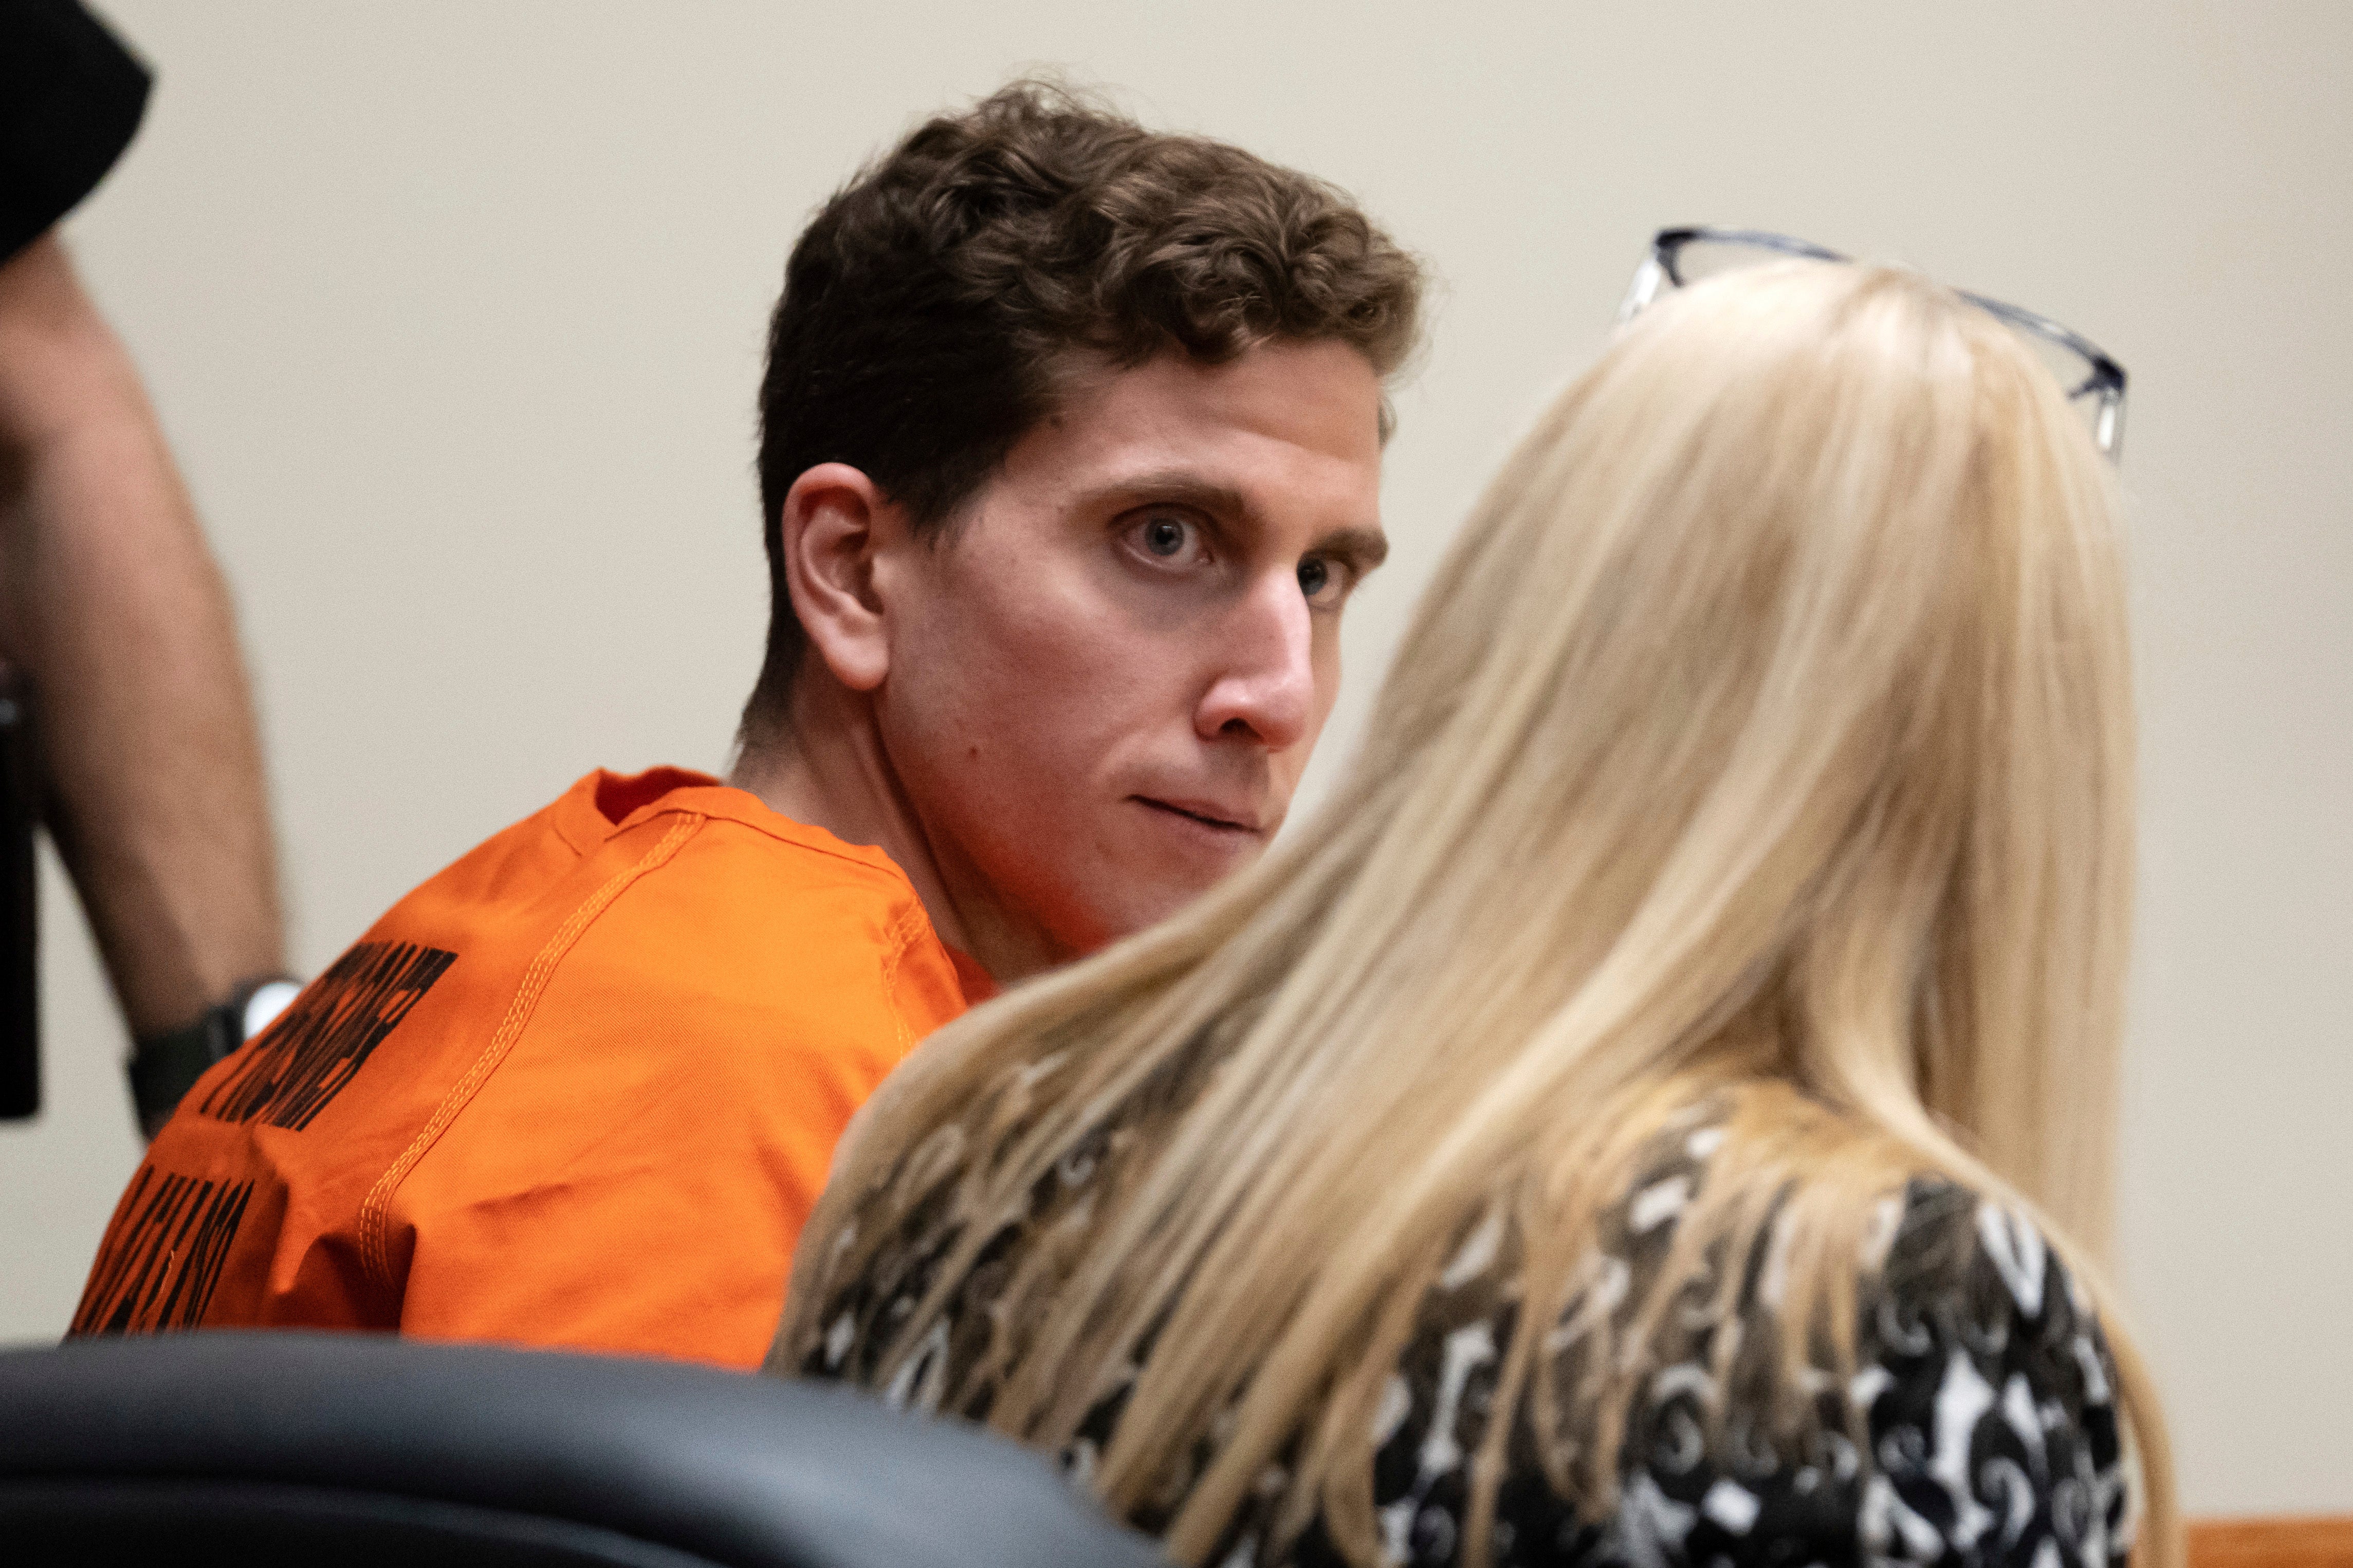 Bryan Kohberger is pictured in court on 5 January